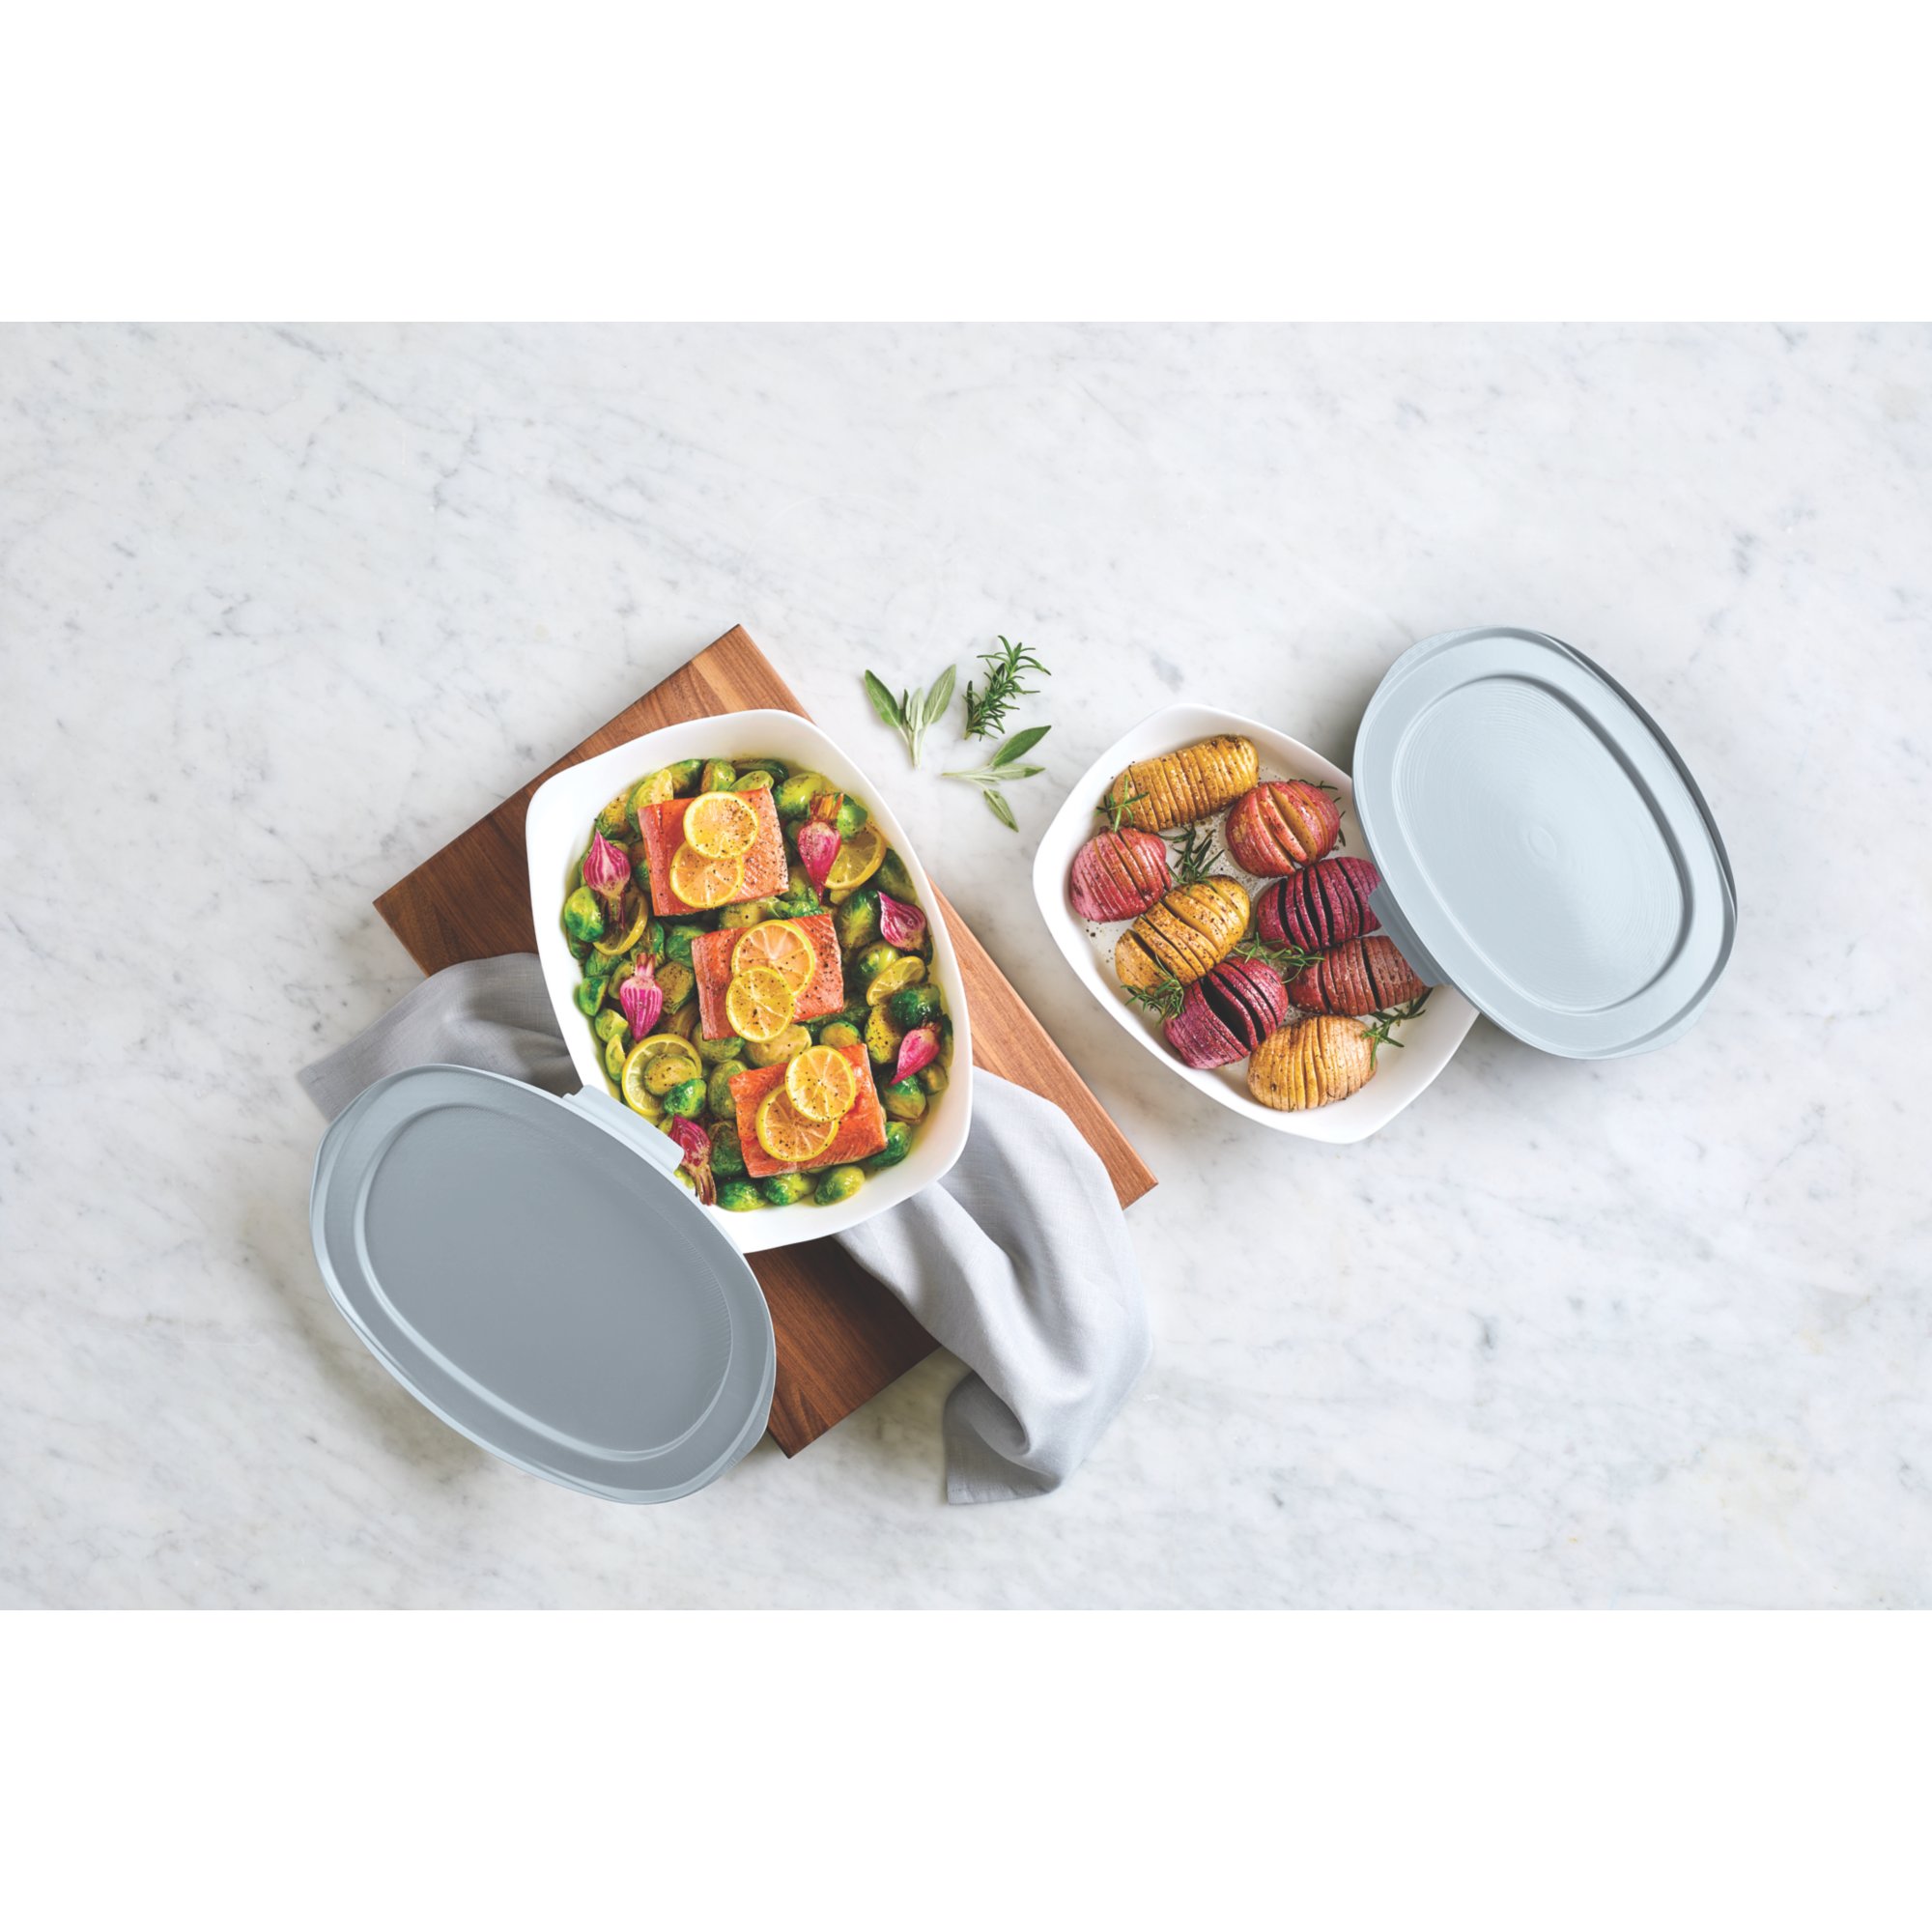 Rubbermaid® DuraLite™ Glass Bakeware, 4-Piece Set with Lids, Baking Dishes  or Casserole Dishes, 10” x 10” and 8” x 8” Square